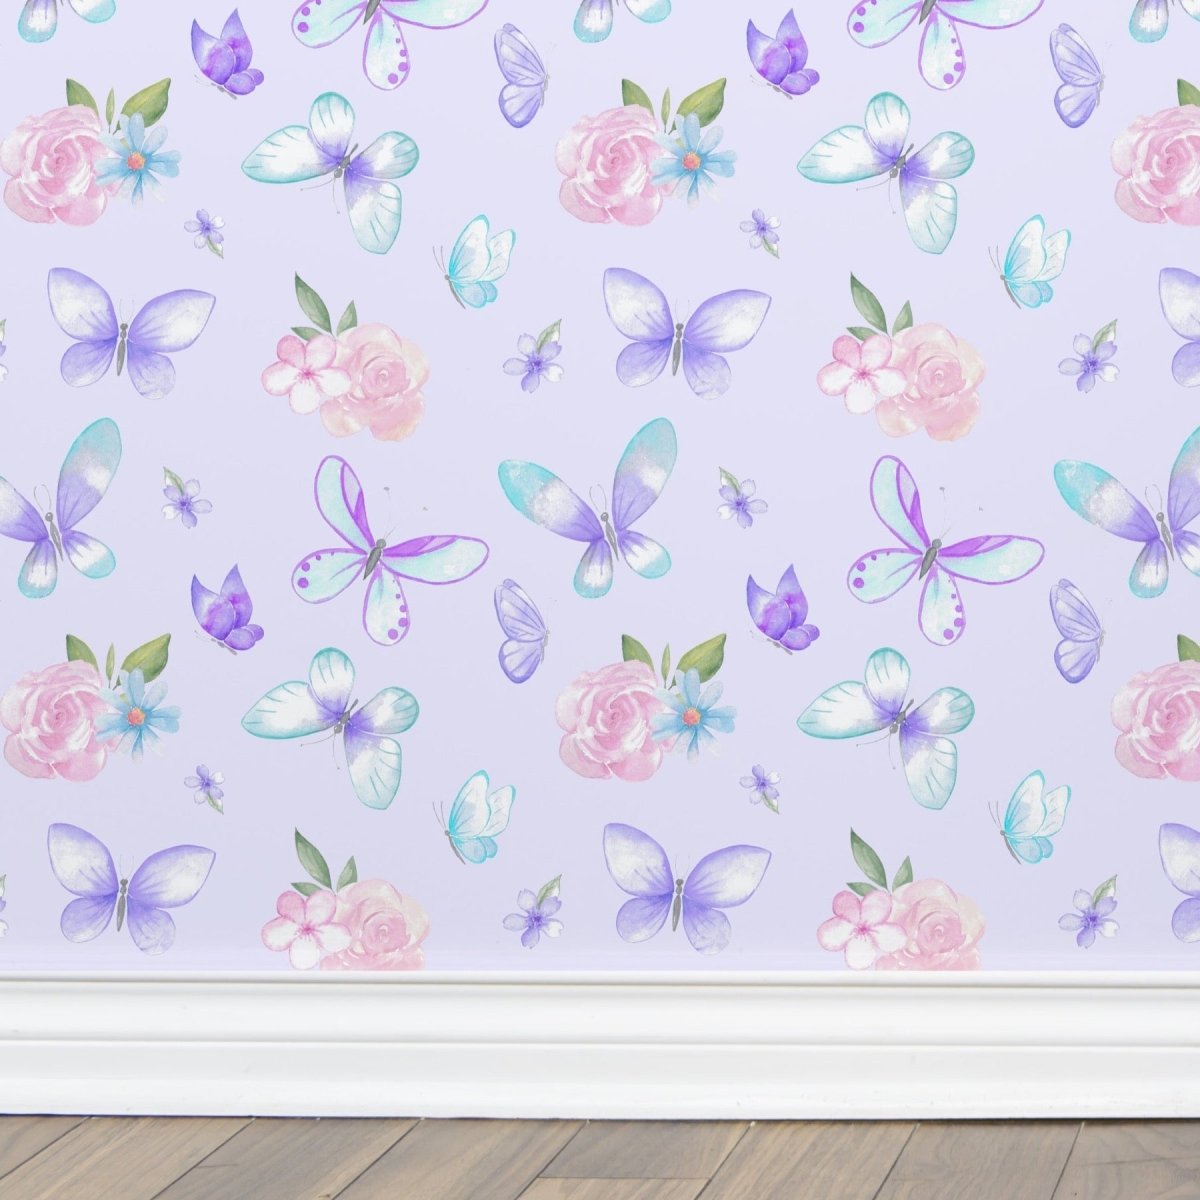 Butterfly Floral Peel & Stick Wallpaper - Butterfly Floral, gender_girl, Theme_Butterfly